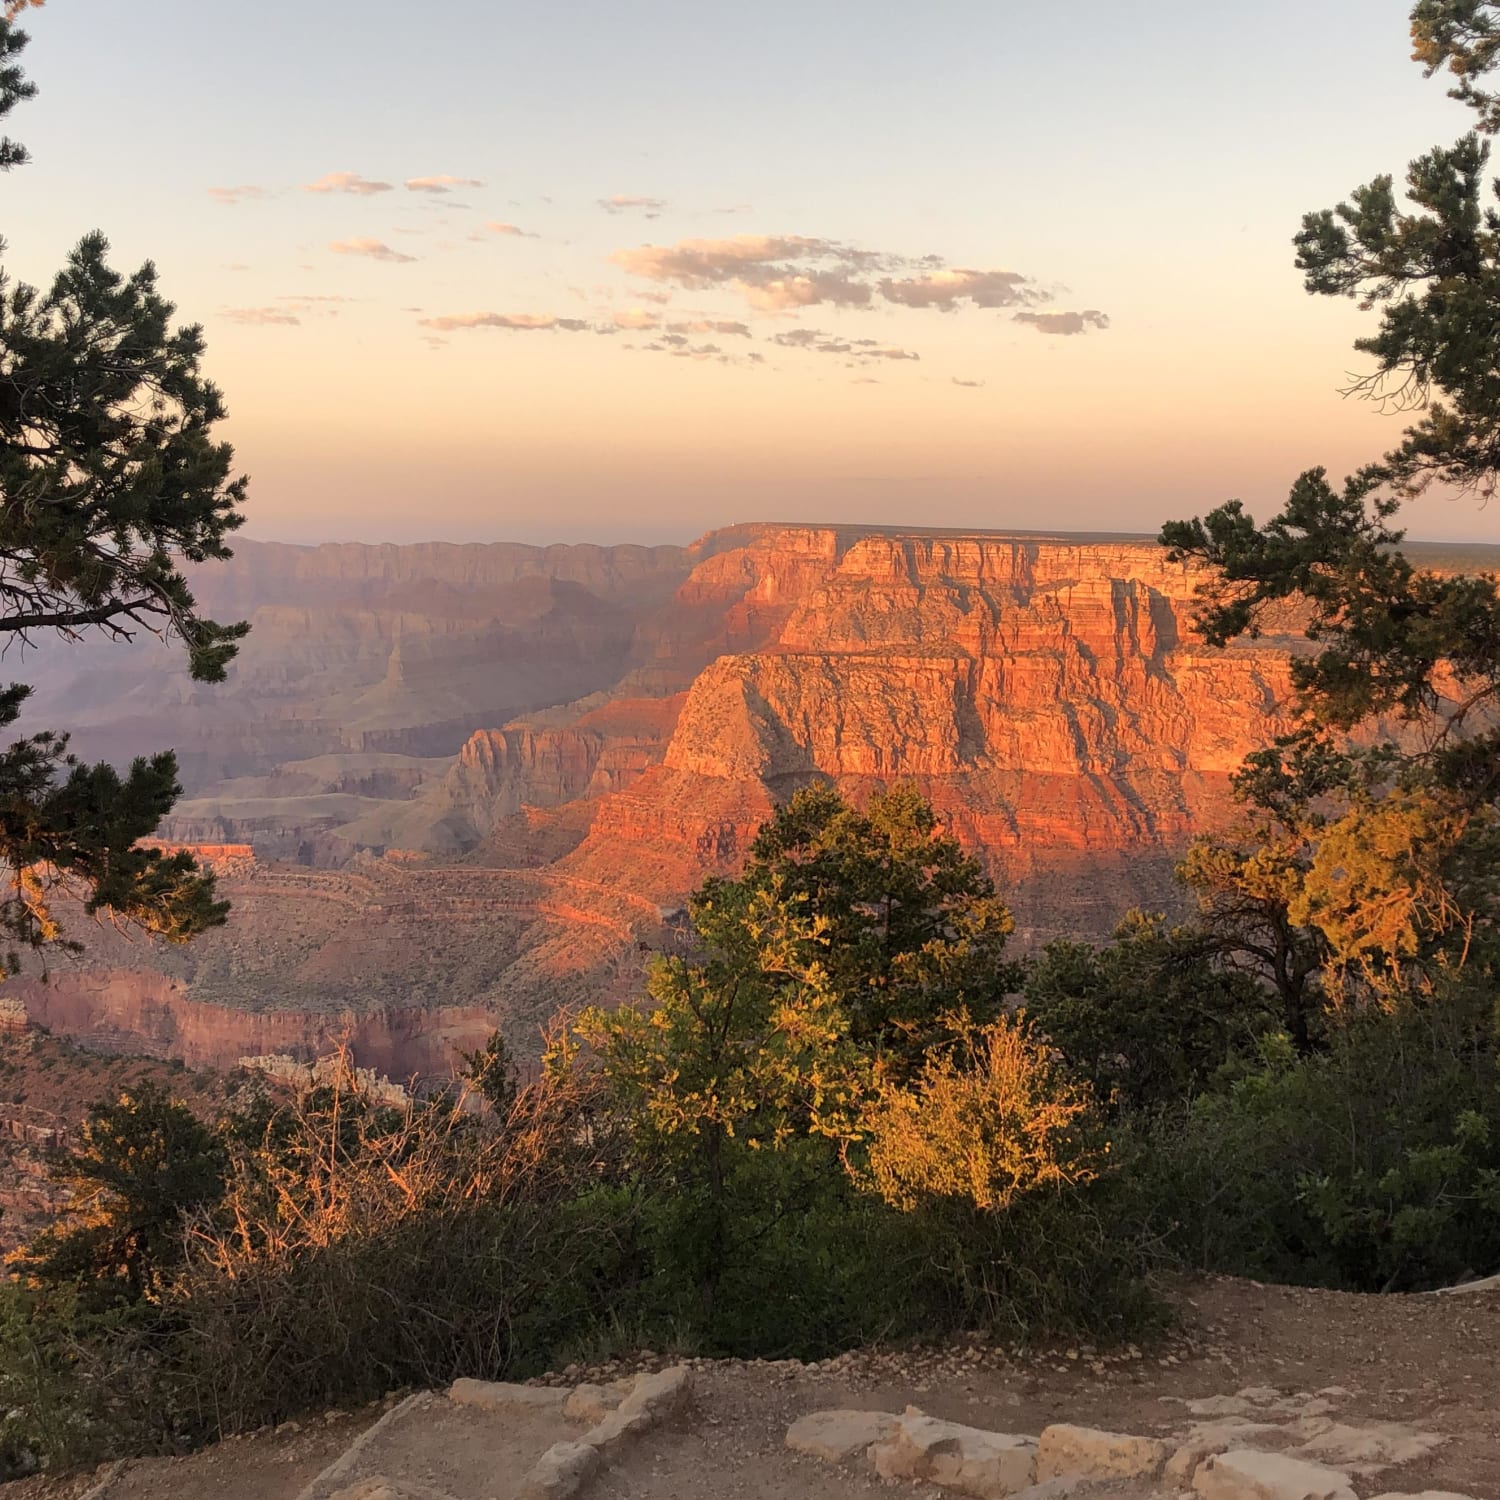 The Grand Canyon at sunset. My first stop on a two week van-trip thru Arizona, Utah, and Colorado.